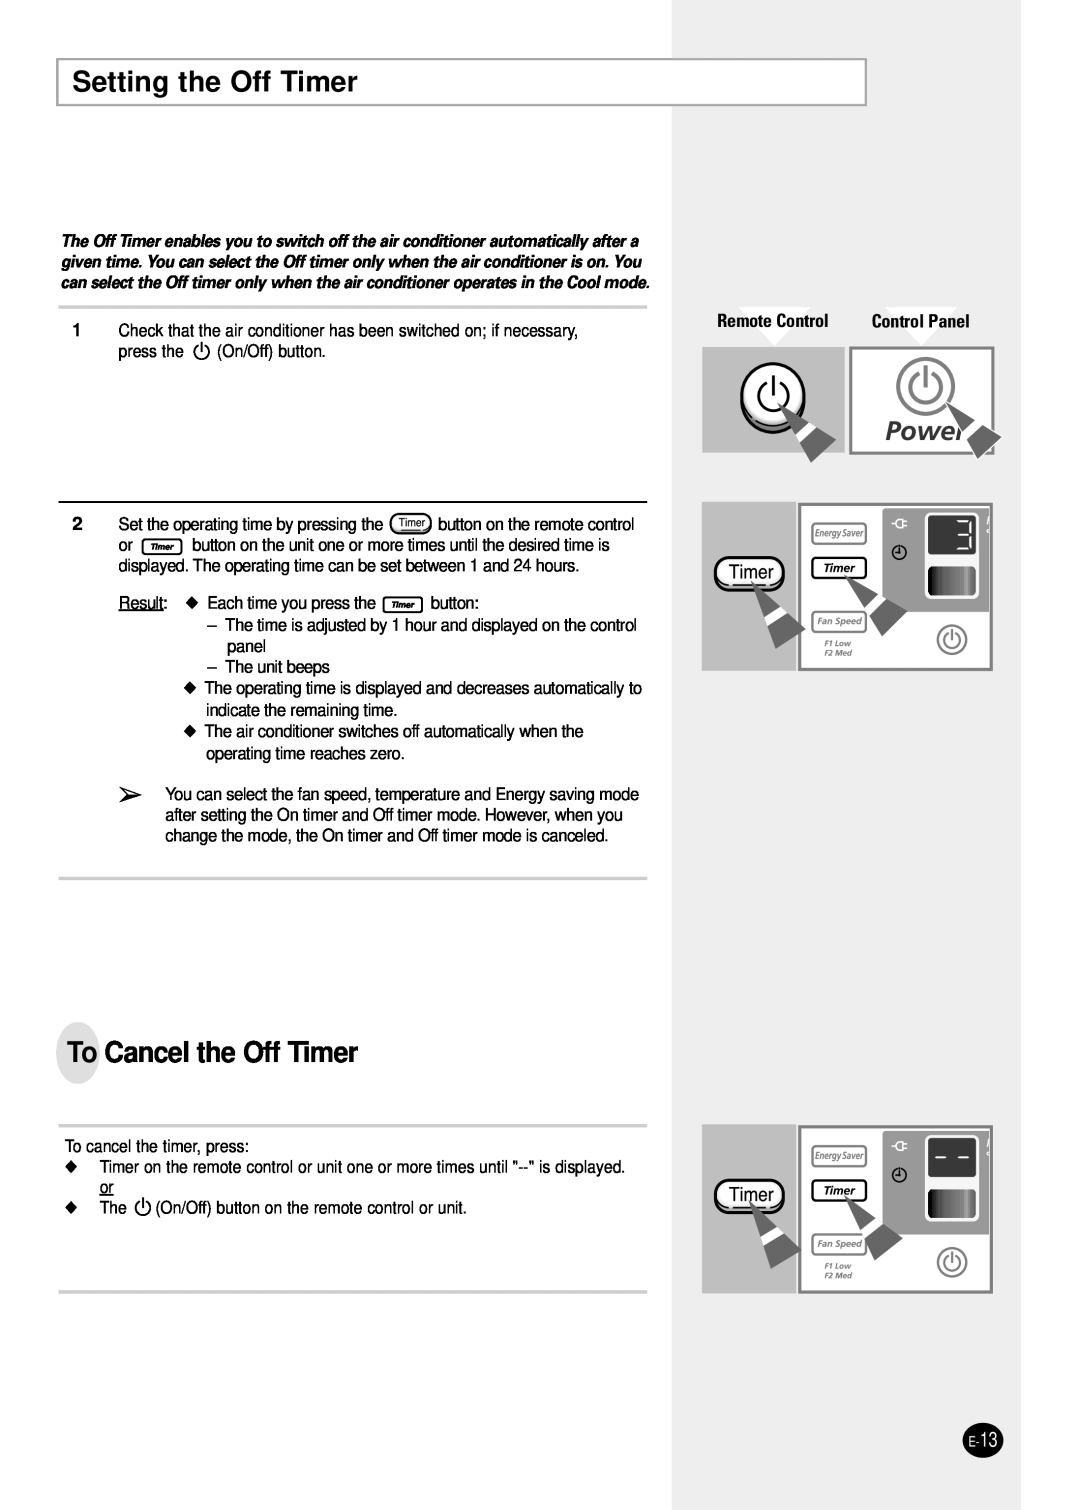 Samsung AW0601B manual Setting the Off Timer, To Cancel the Off Timer, Control Panel, Remote Control 